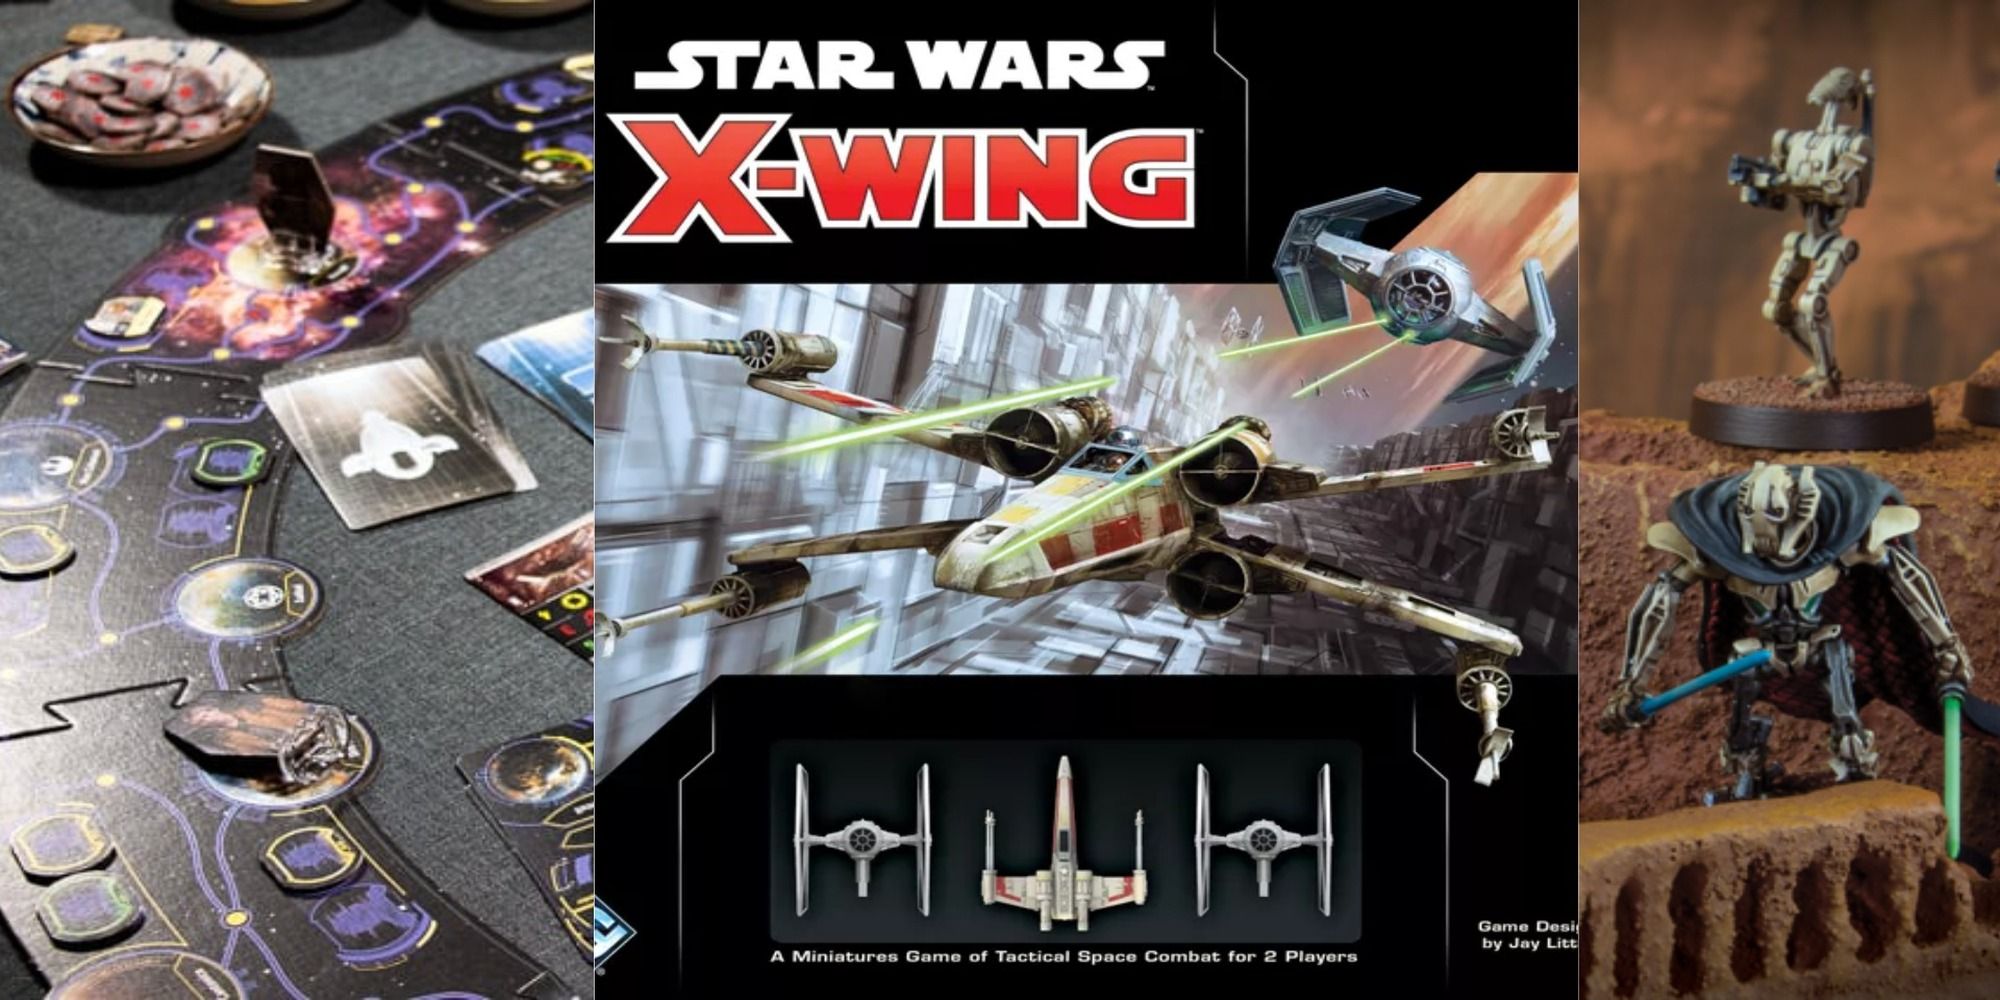 title image star wars board games outer rim x-wing legion